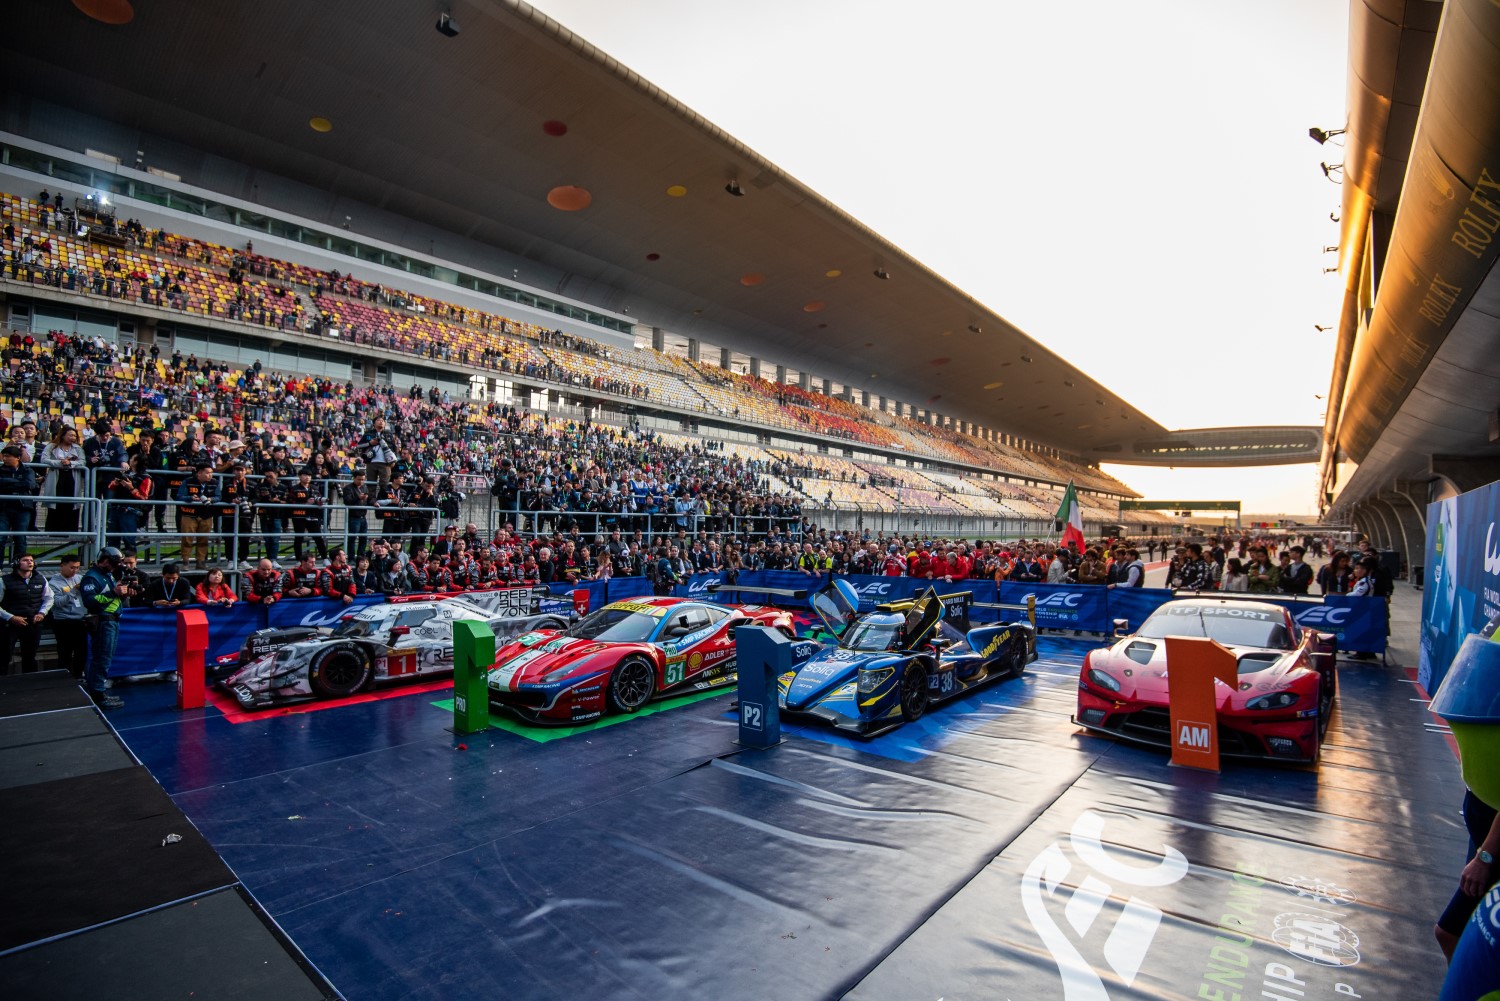 The winning cars in Parc Ferme